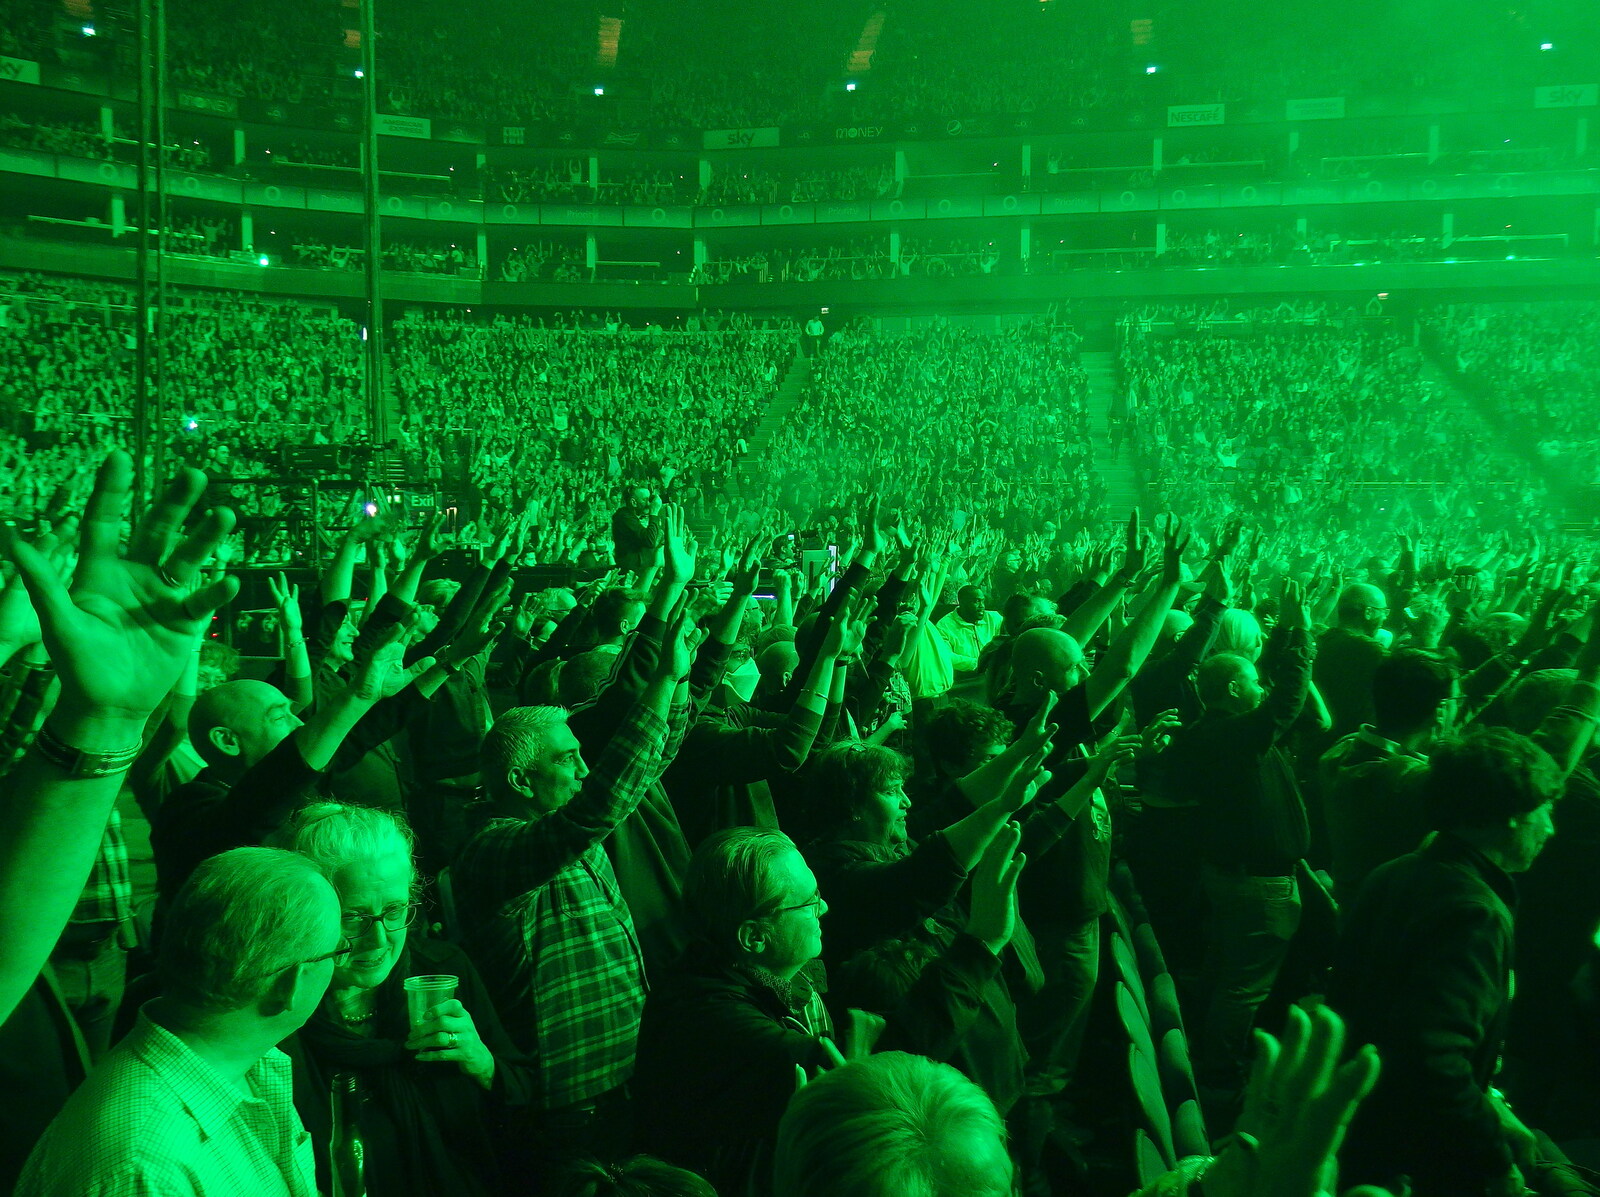 Hands in the air for Home By The Sea from Genesis at the O2, North Greenwich, London - 24th March 2022